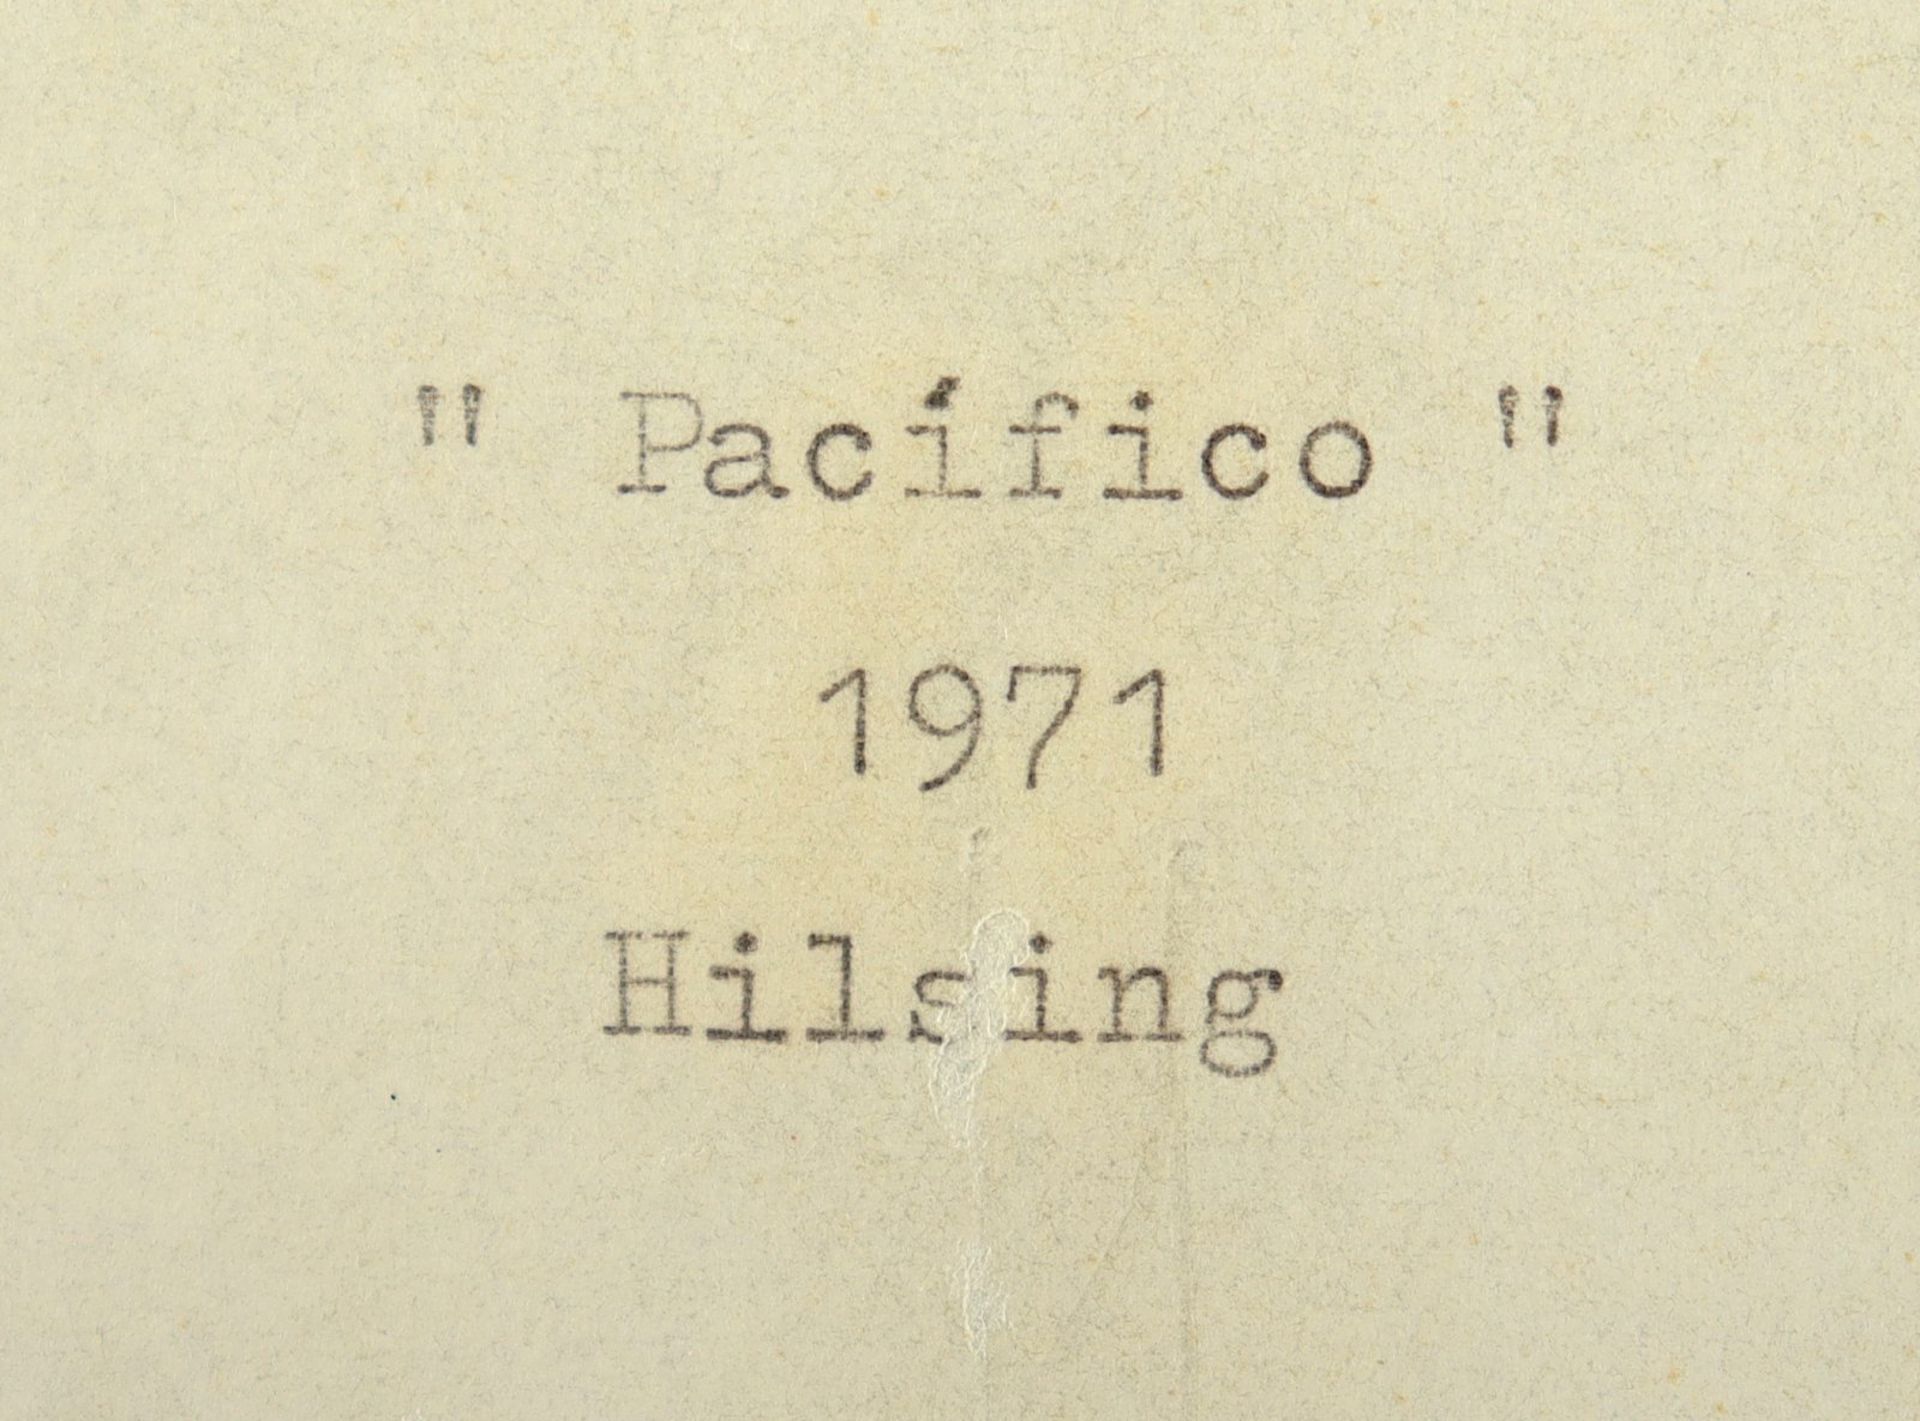 Hilsing, Collage, R. - Image 3 of 3